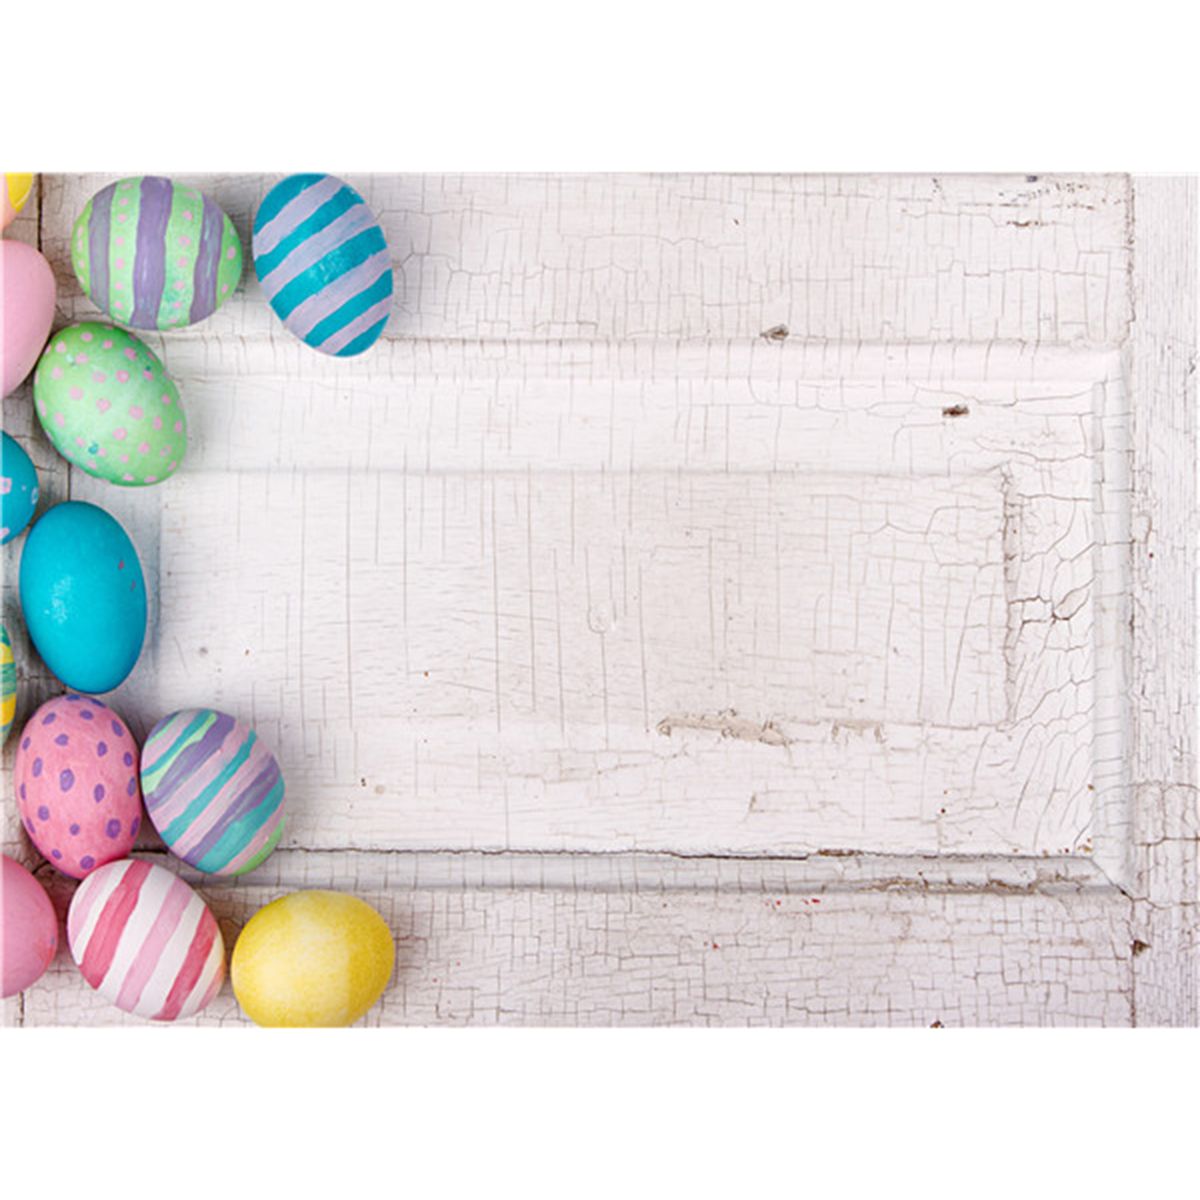 5x7FT-Vinyl-Easter-Egg-White-Wall-Photography-Backdrop-Background-Studio-Prop-1446872